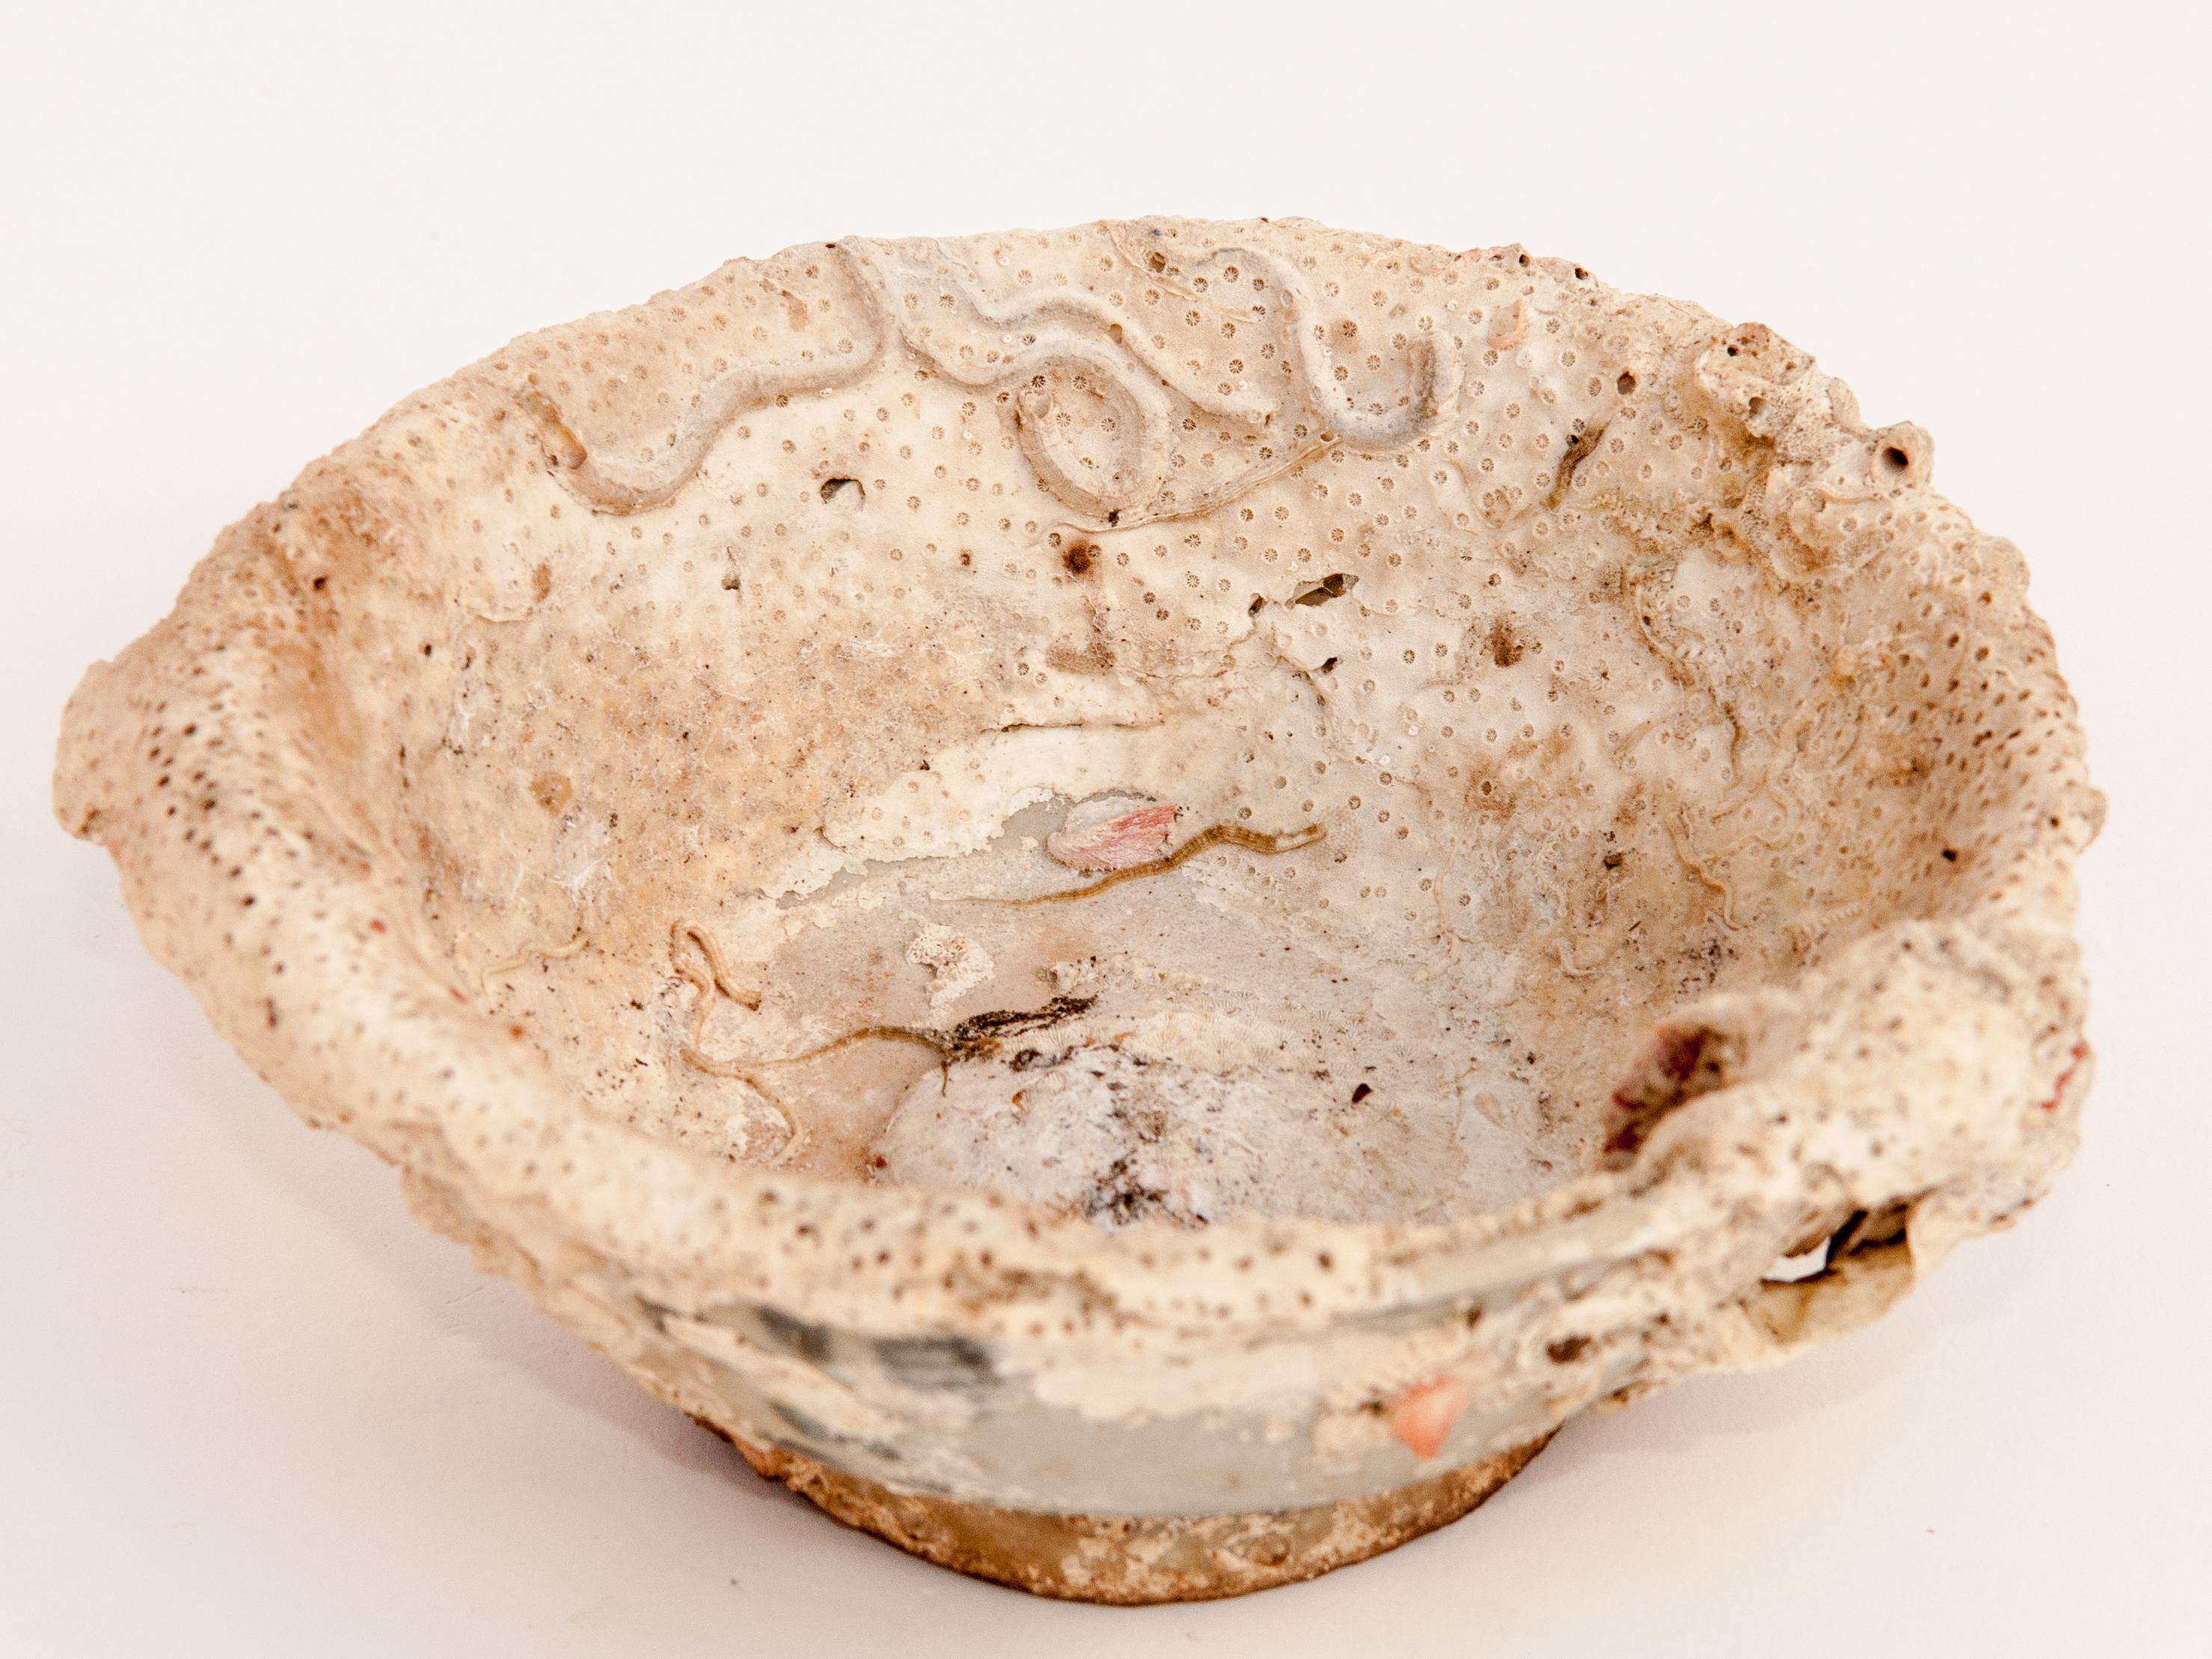 Hand-Crafted Small Song Dynasty Celadon Bowl with Encrustations, China, 12th Century.